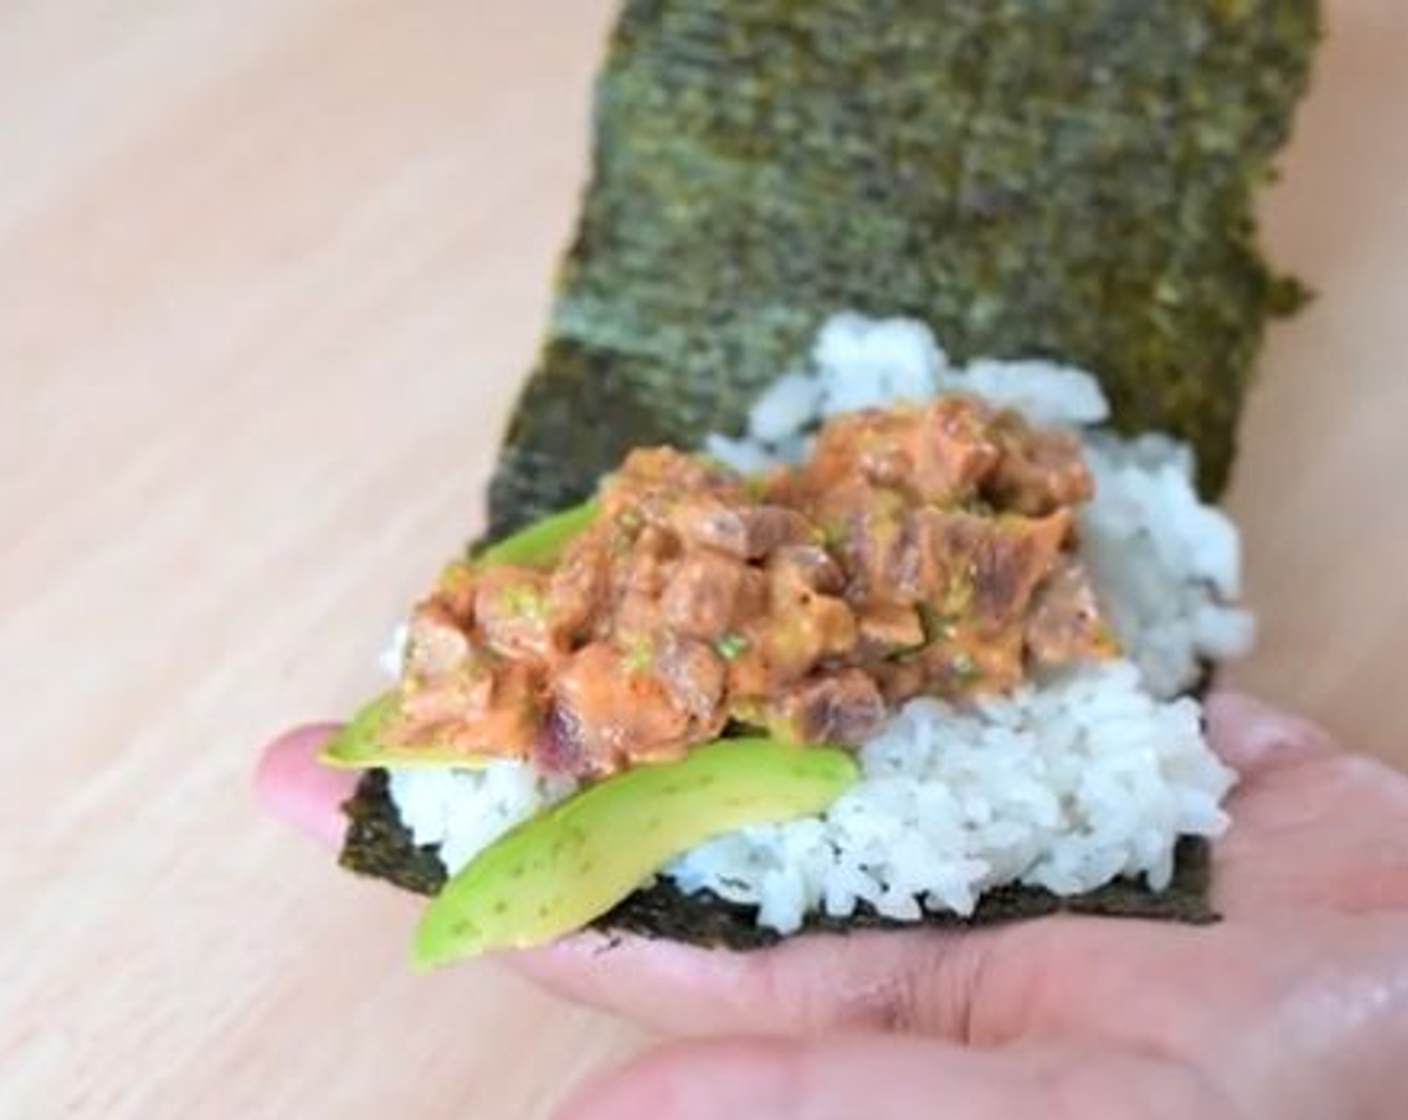 step 3 Extend half of the cooked Japanese Rice (3 Tbsp) over half of a Nori Sheet (1 sheet). Add Avocados (to taste) and the tuna mixture. Take the bottom end of the nori sheet and bring upwards to roll into a cone. Use a grain of rice to stick the nori together where it meets.